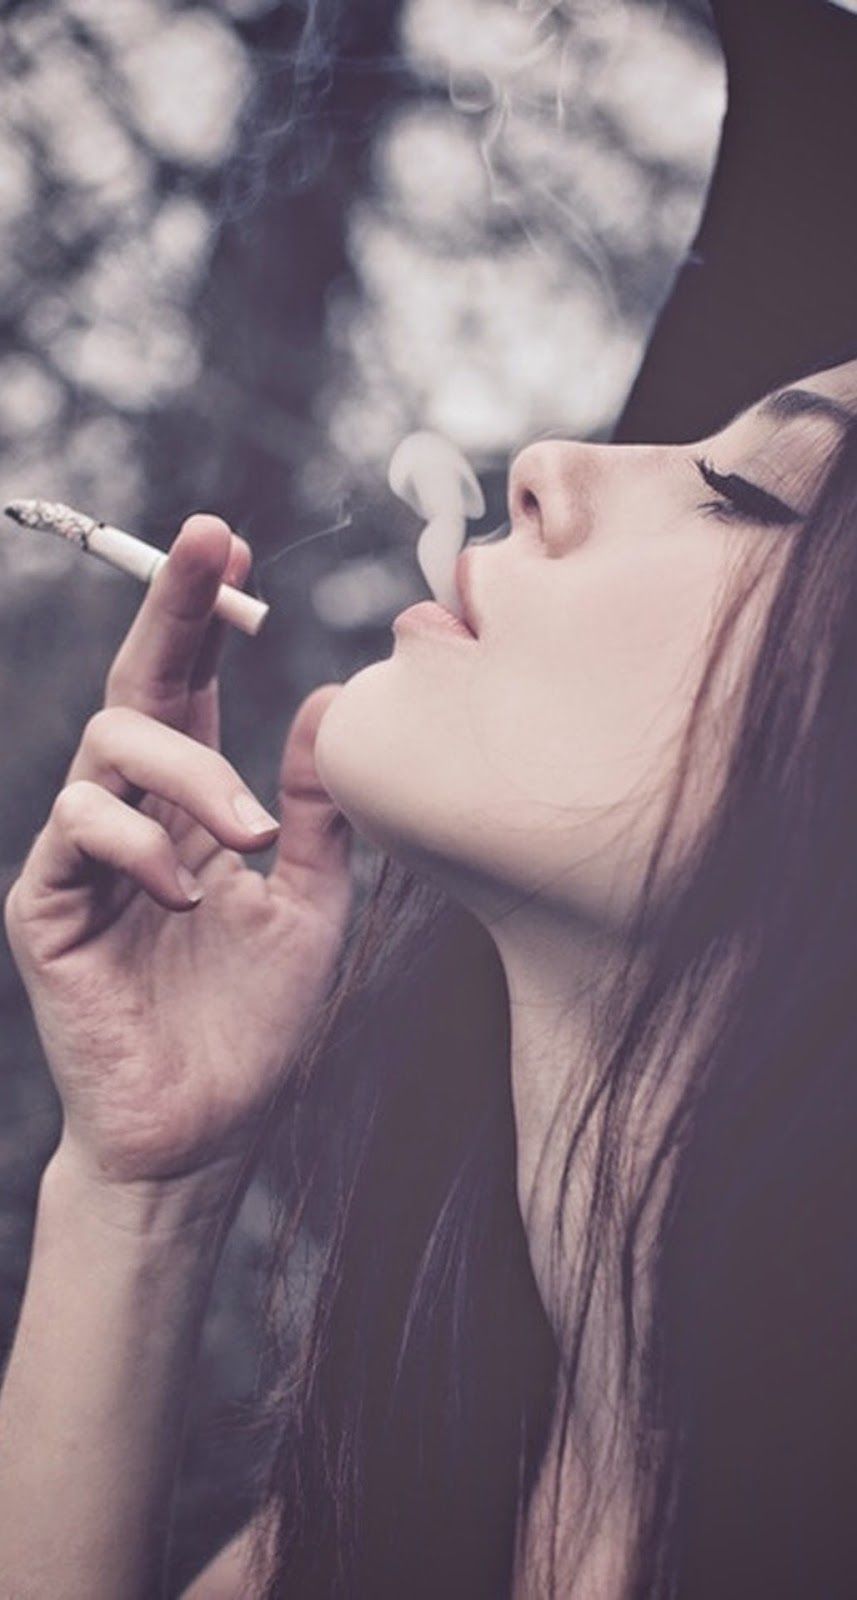 iPhone And Android Wallpaper Girl Smoking